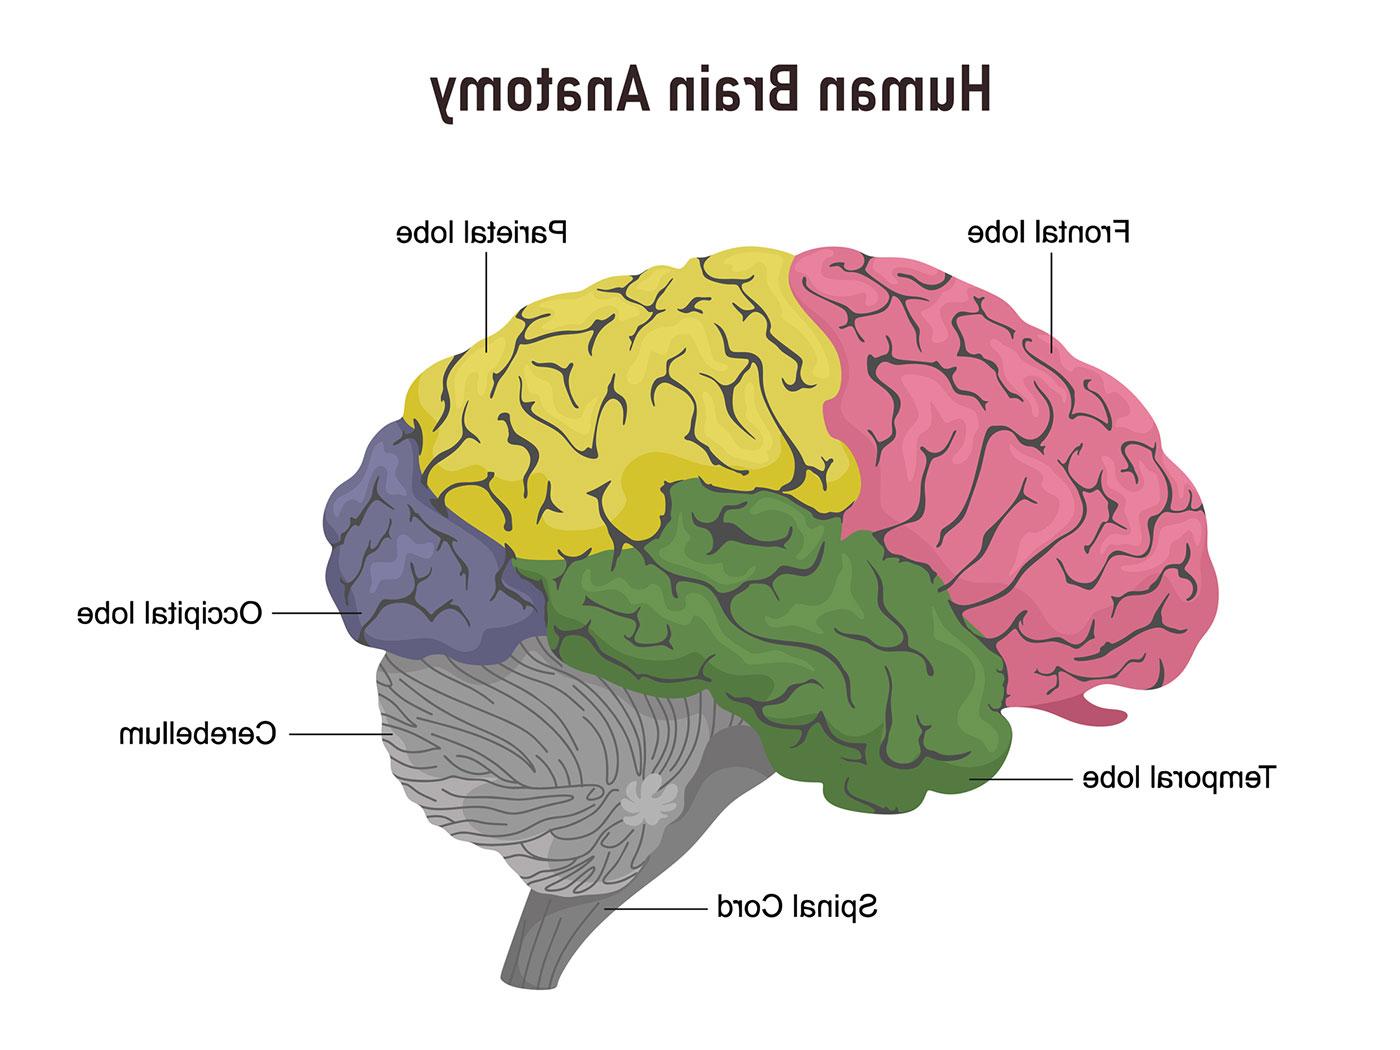 Diagram of the brain's lobes: frontal, temporal, parietal and occipital